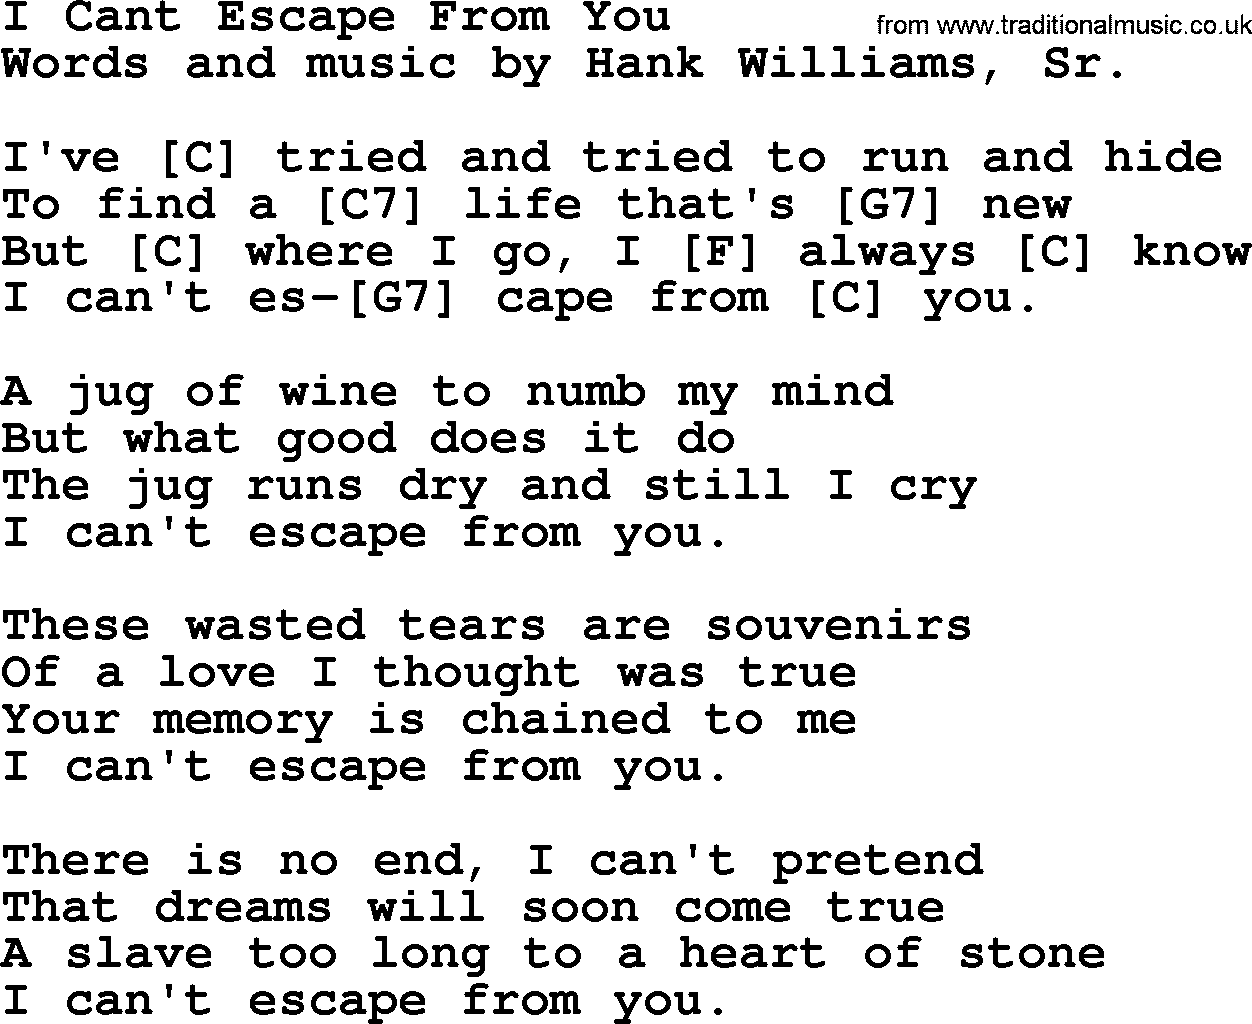 Hank Williams song I Cant Escape From You, lyrics and chords